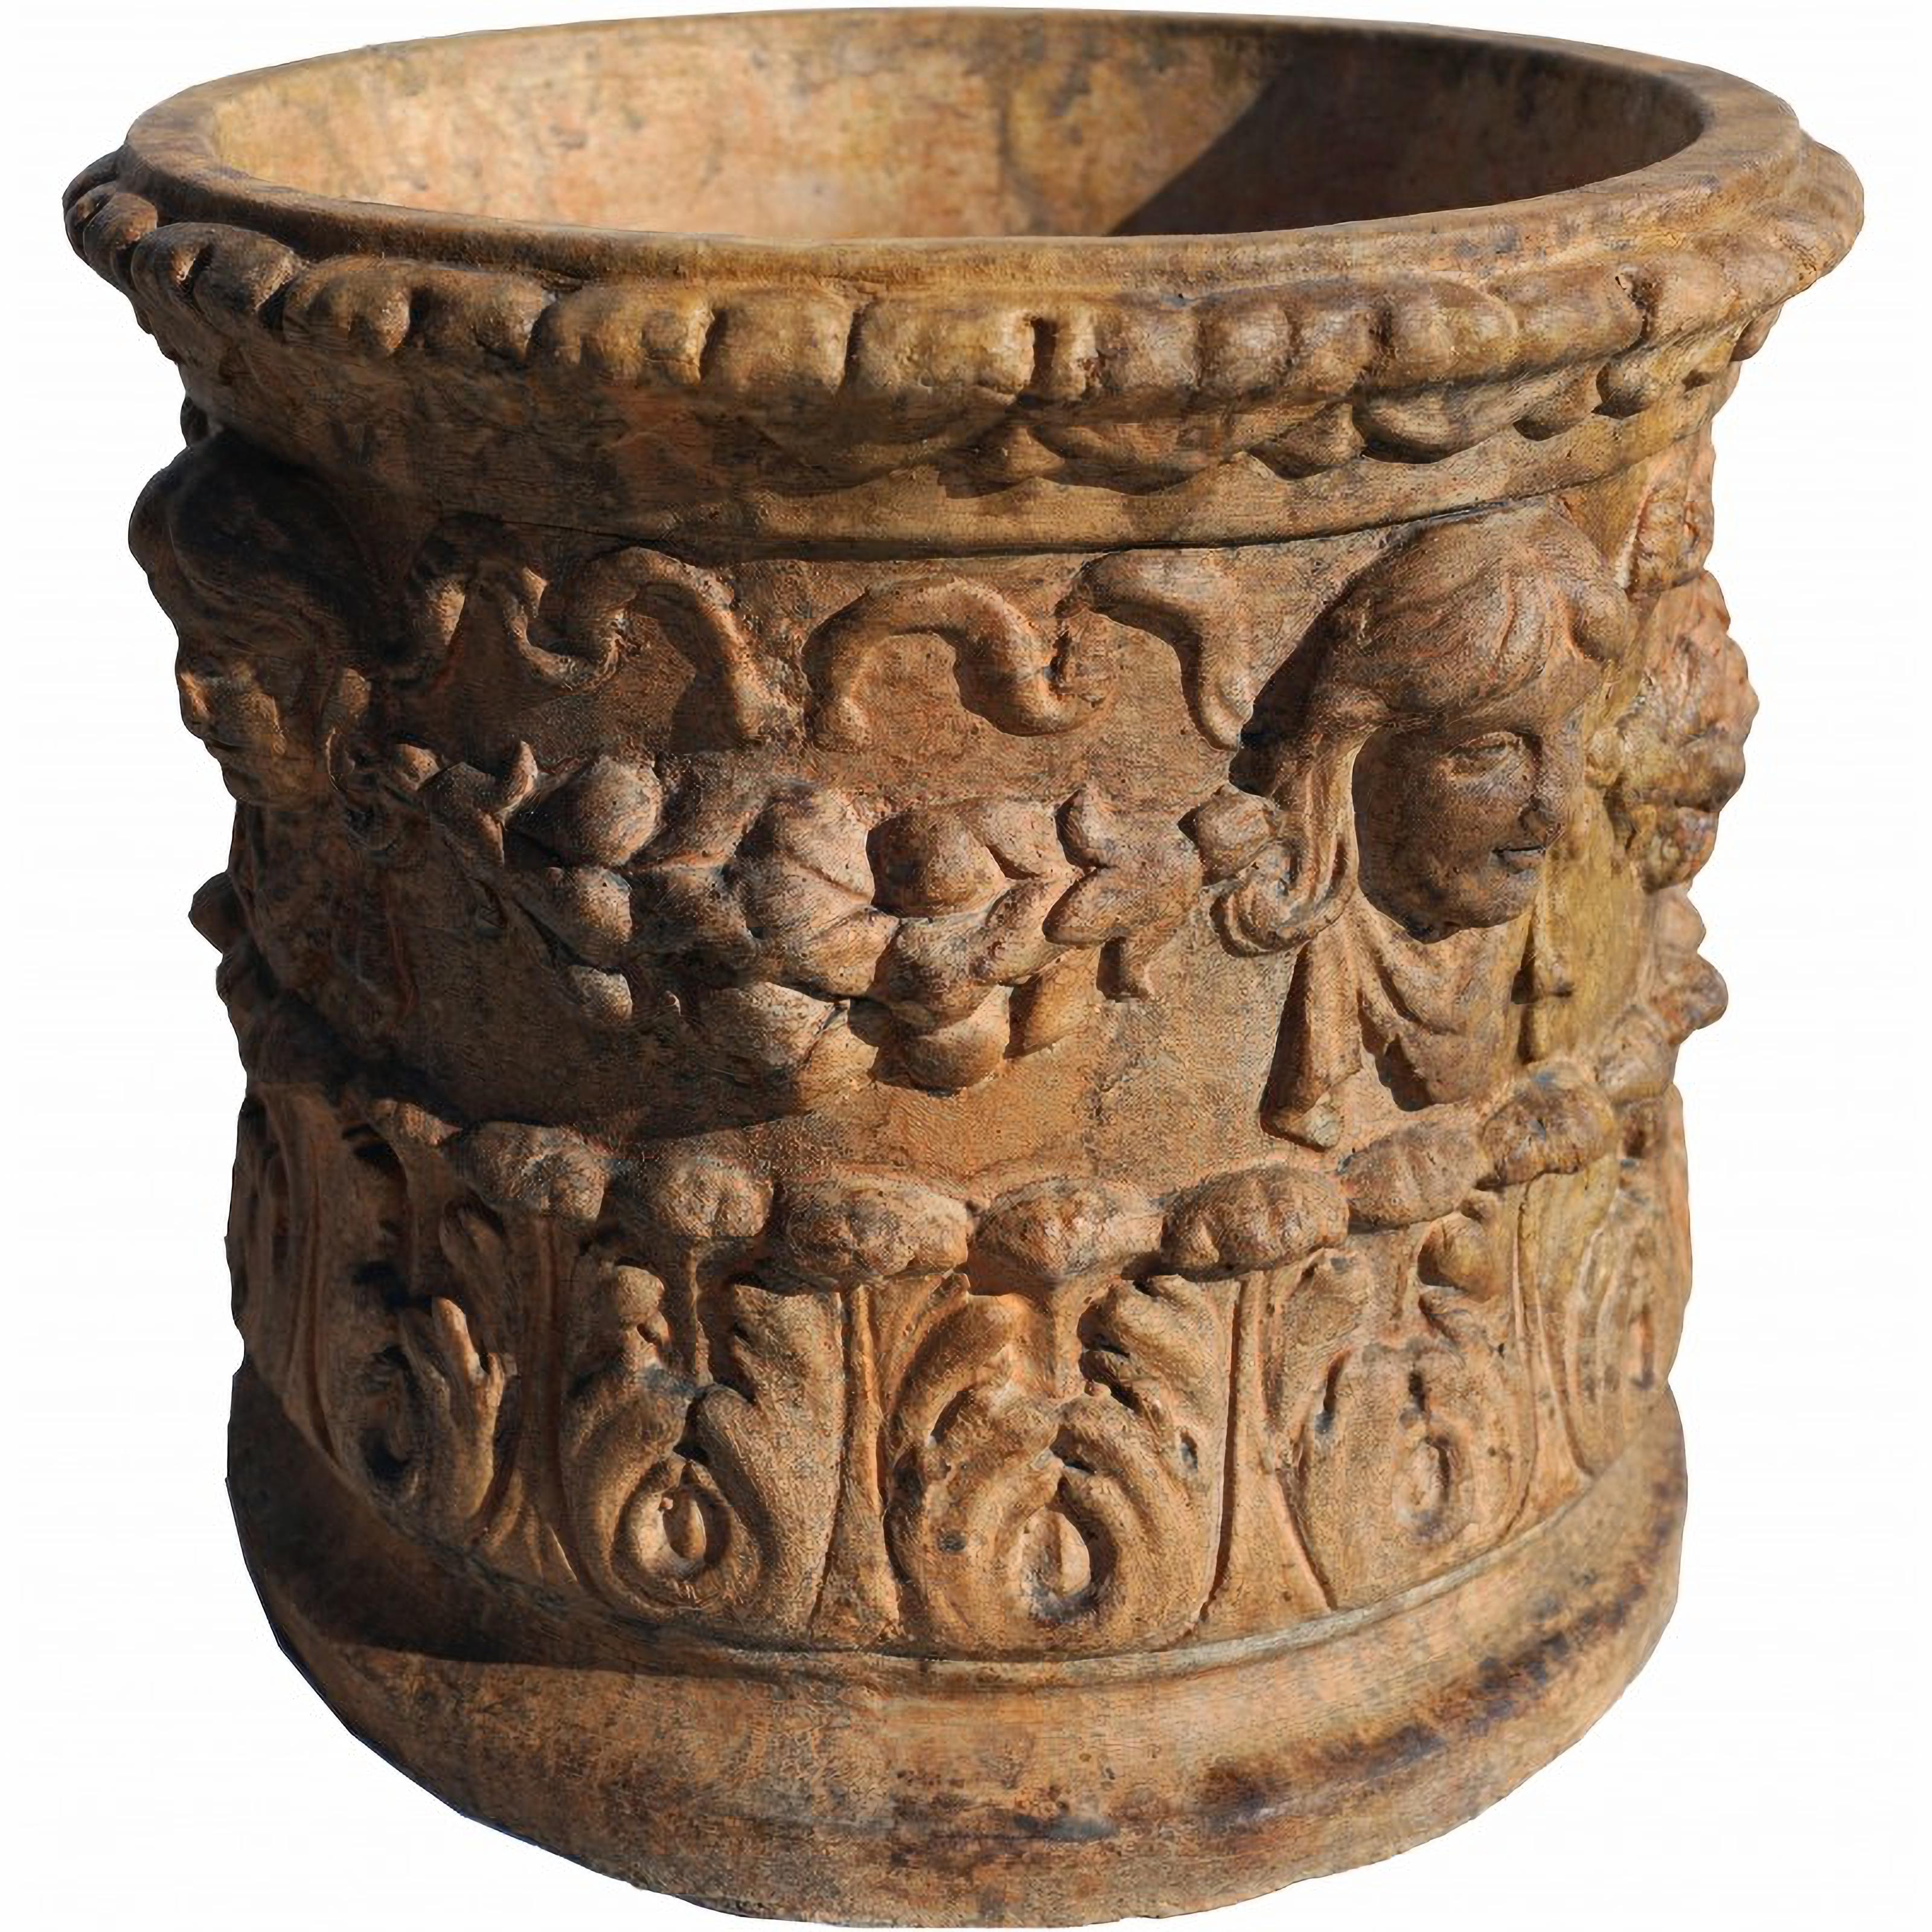 TERRACOTTA CACHEPOT, Ø32CM ANCIENT FLORENTINE MODEL OF THE RICCERI FAMILY 20th Century

Handmade in Tuscany
Cachepot made from the original cast of the ancient Ricceri factory.
Achantus leaves and festoons.

HEIGHT 34 cm
WIDTH 46 cm
INTERNAL MOUTH